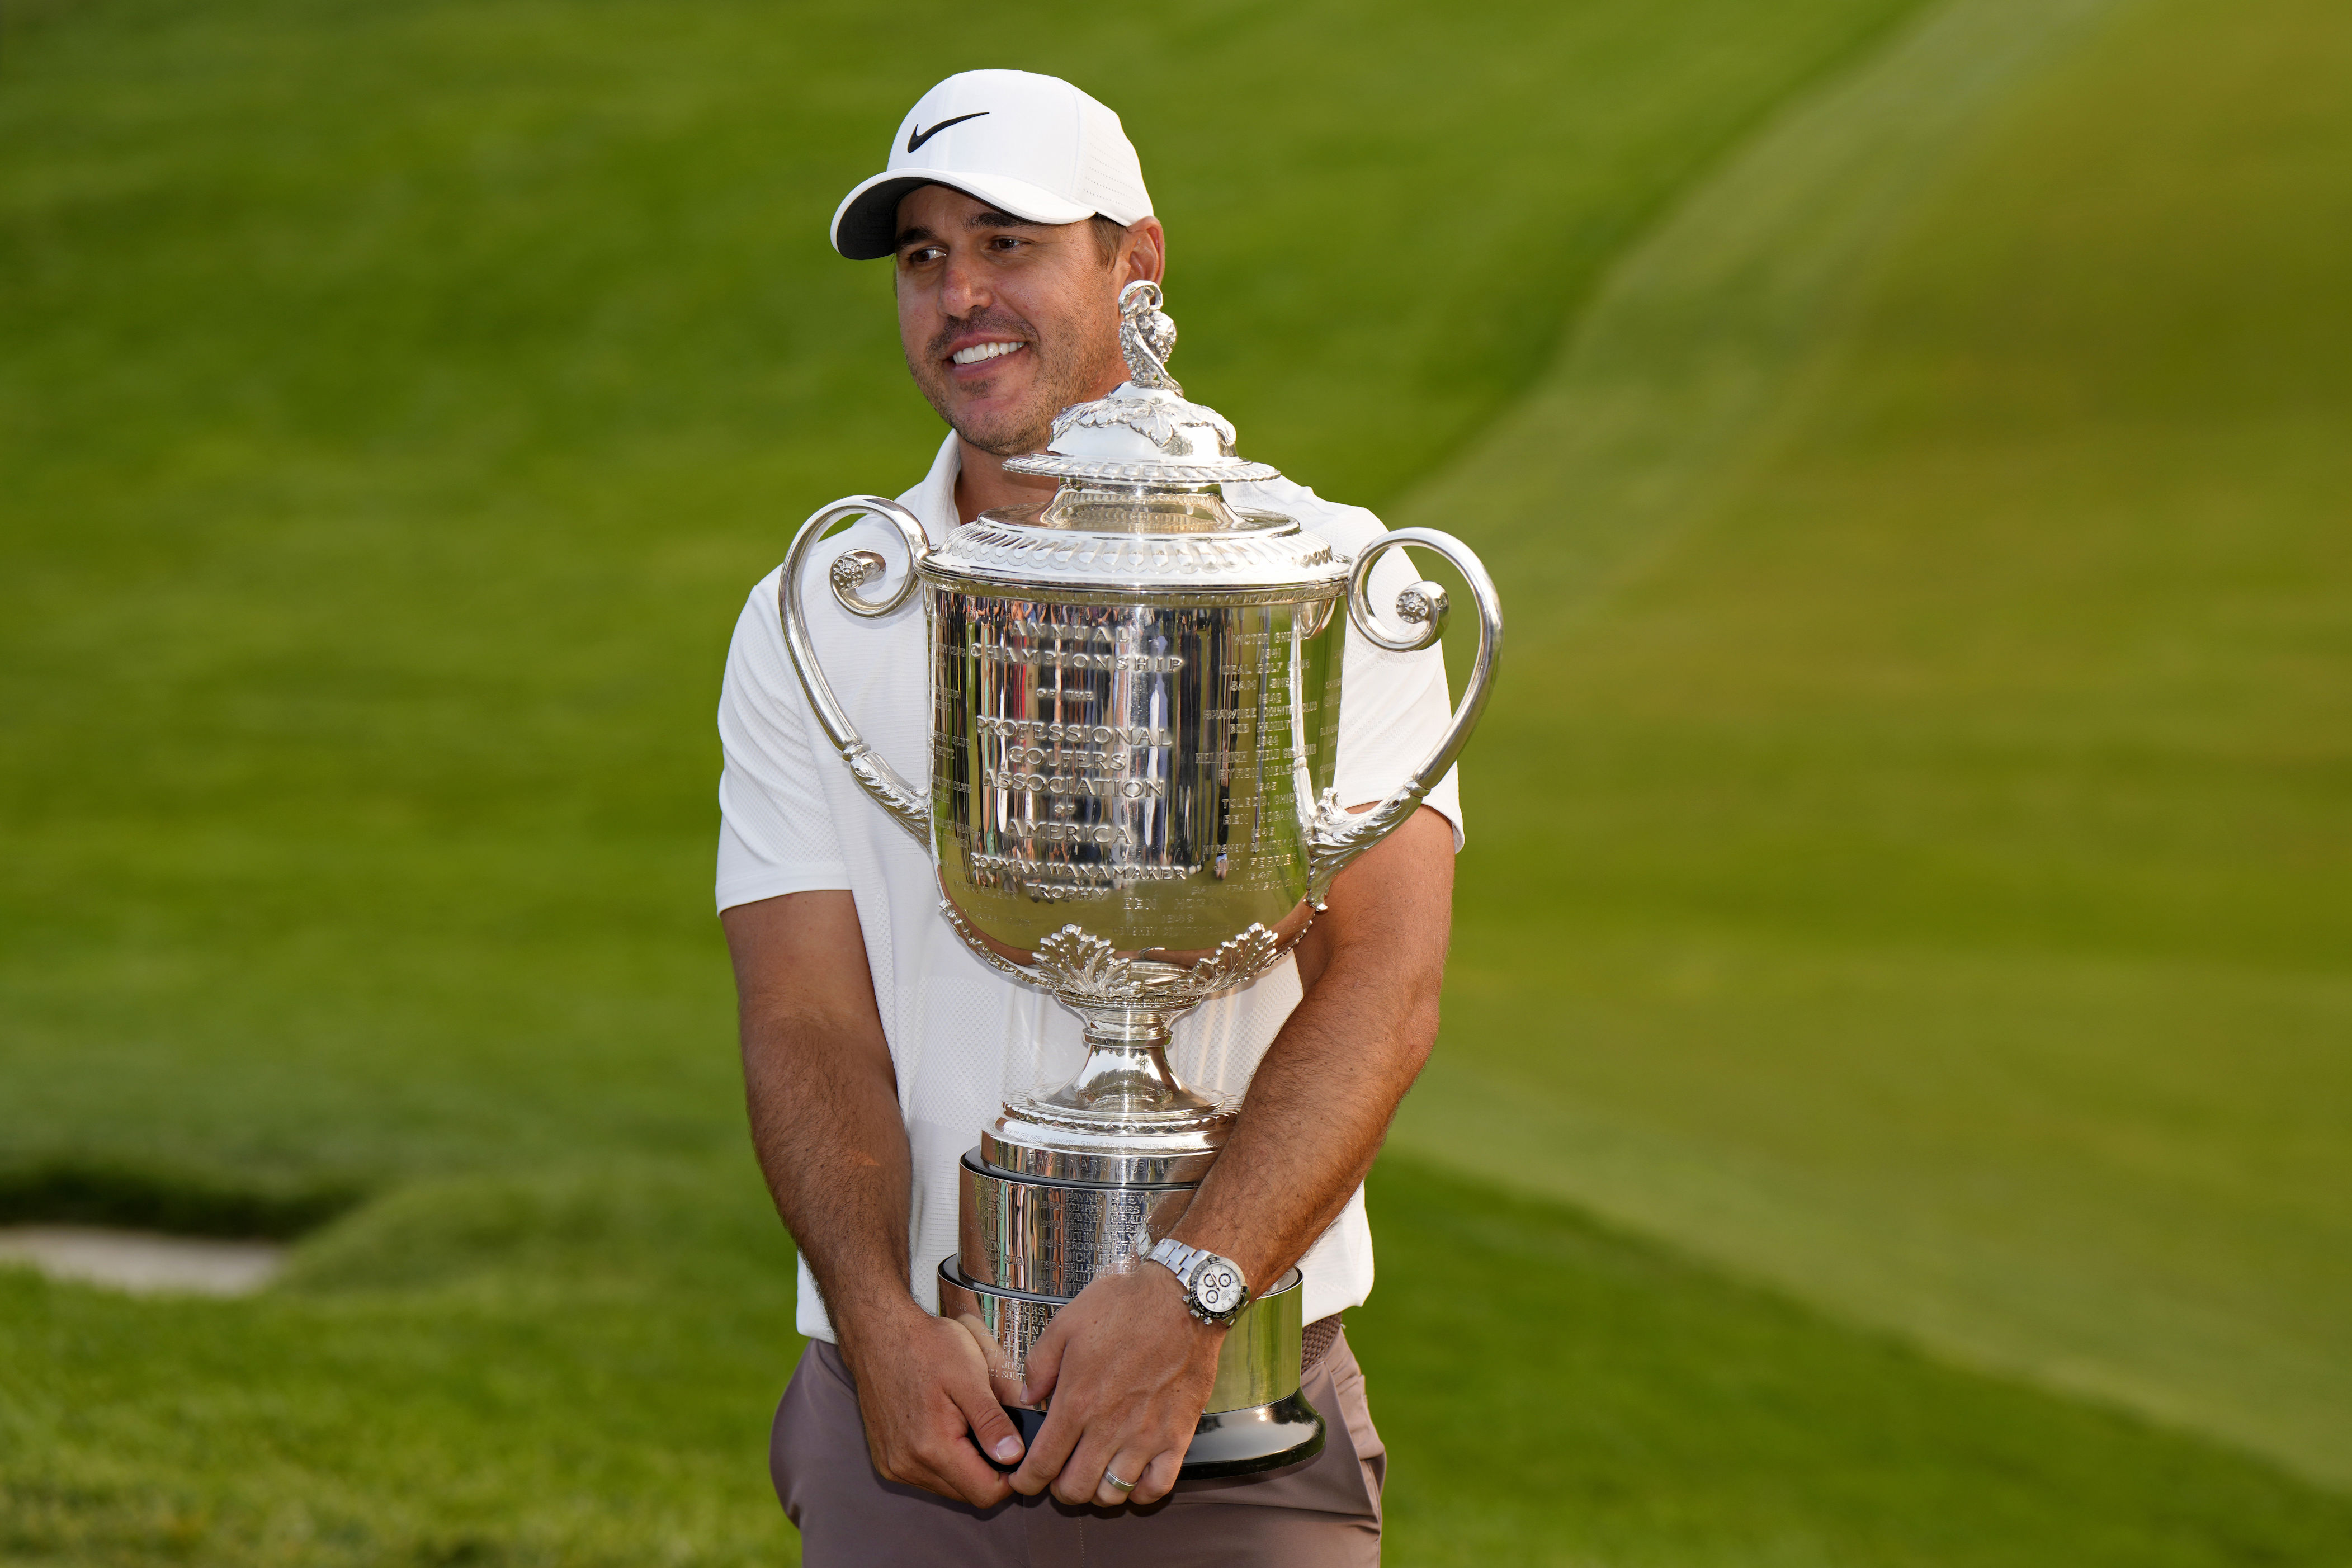 Prize money payouts for each player at the 2023 PGA Championship at Oak